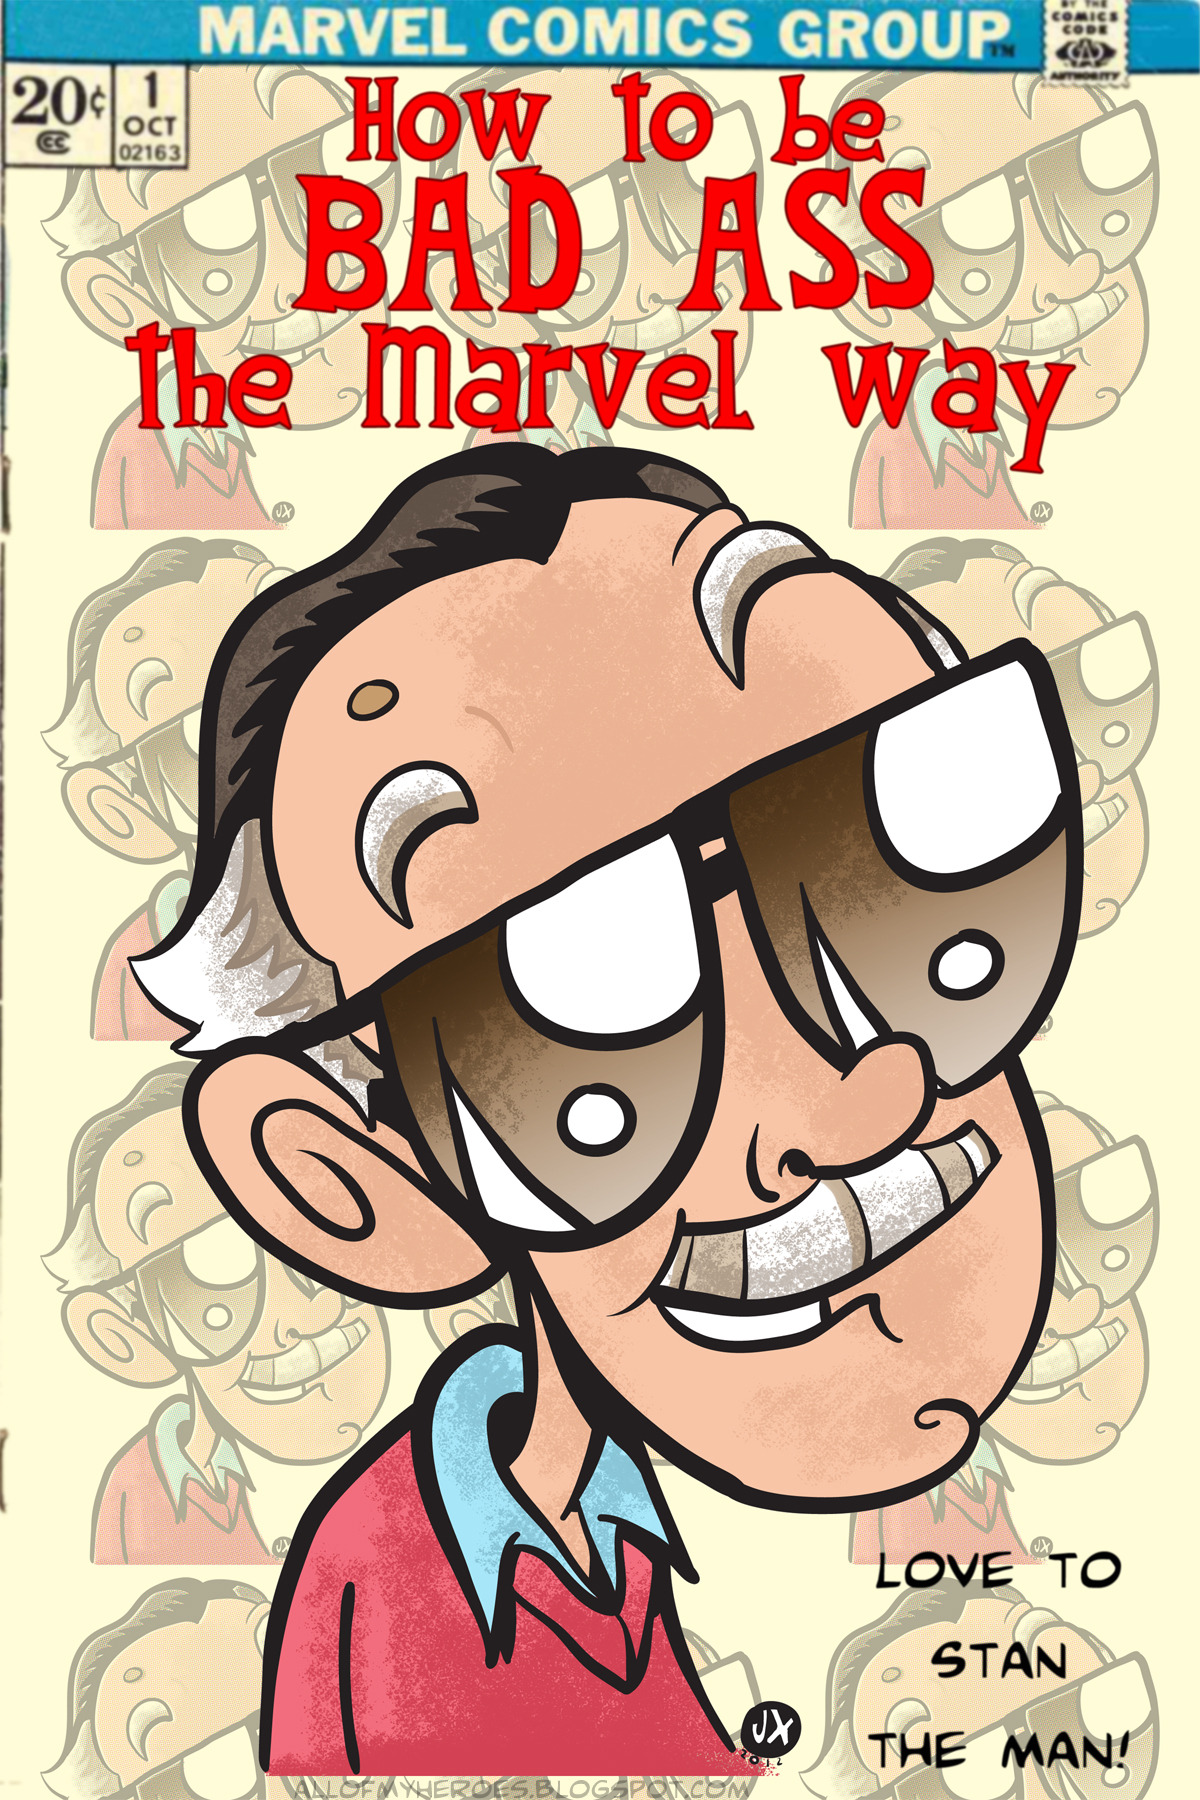 tumblrtoons: Watched a great doc on the great Stan Lee yesterday and sketched him as a warm-up before cutting into freelance. I liked it so much I inked it up and colored it. You’re the best Stan! Thanks for all the comics, heroes, and all you’ve had a hand in creating. Excelsior! -Jeaux Janovsky Happy 92nd Birthday to the One and Only Stan Lee! -Jx